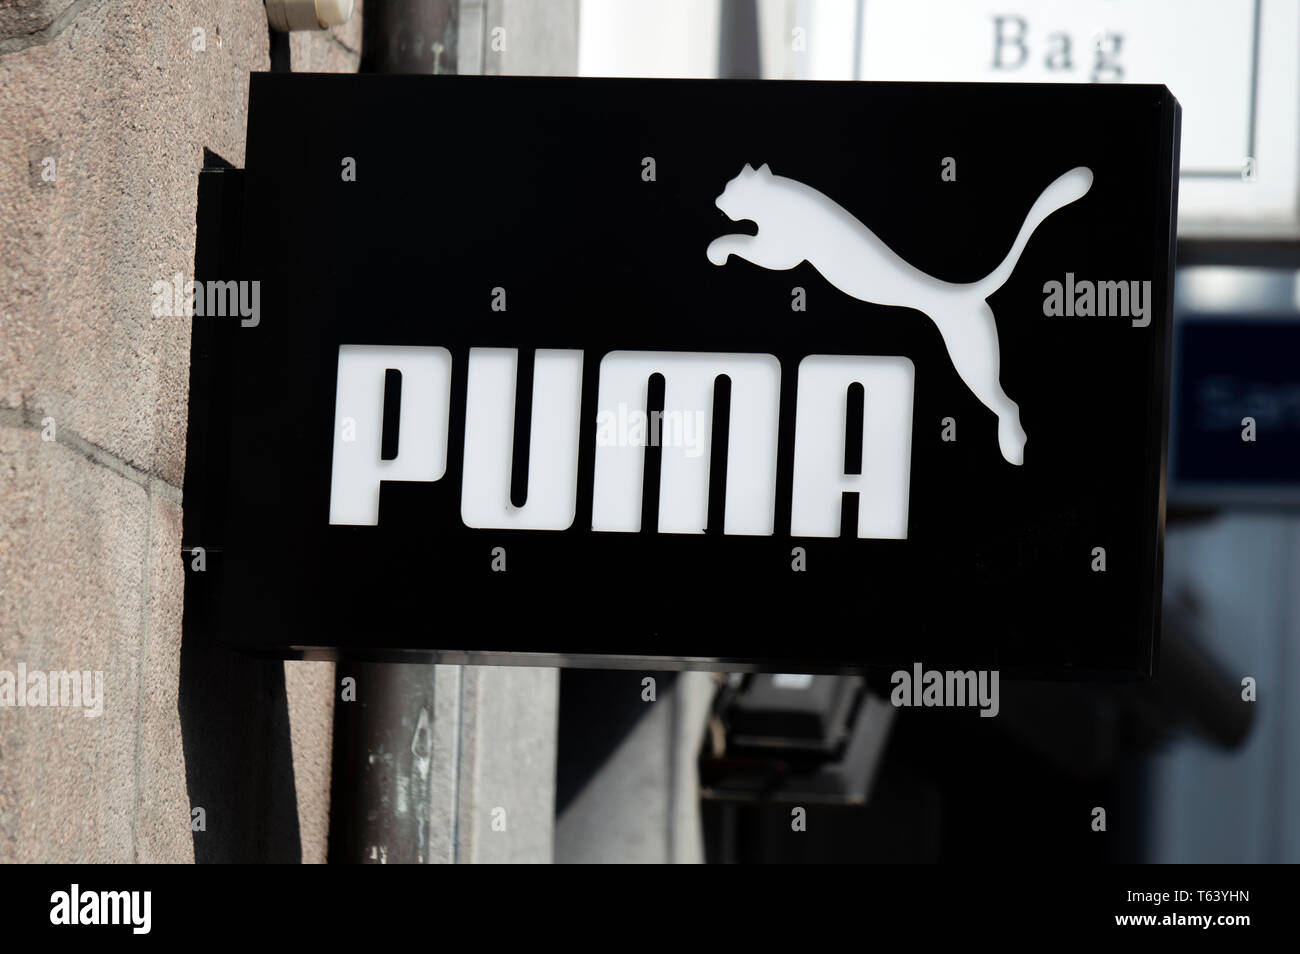 Puma Logo High Resolution Stock Photography and Images - Alamy